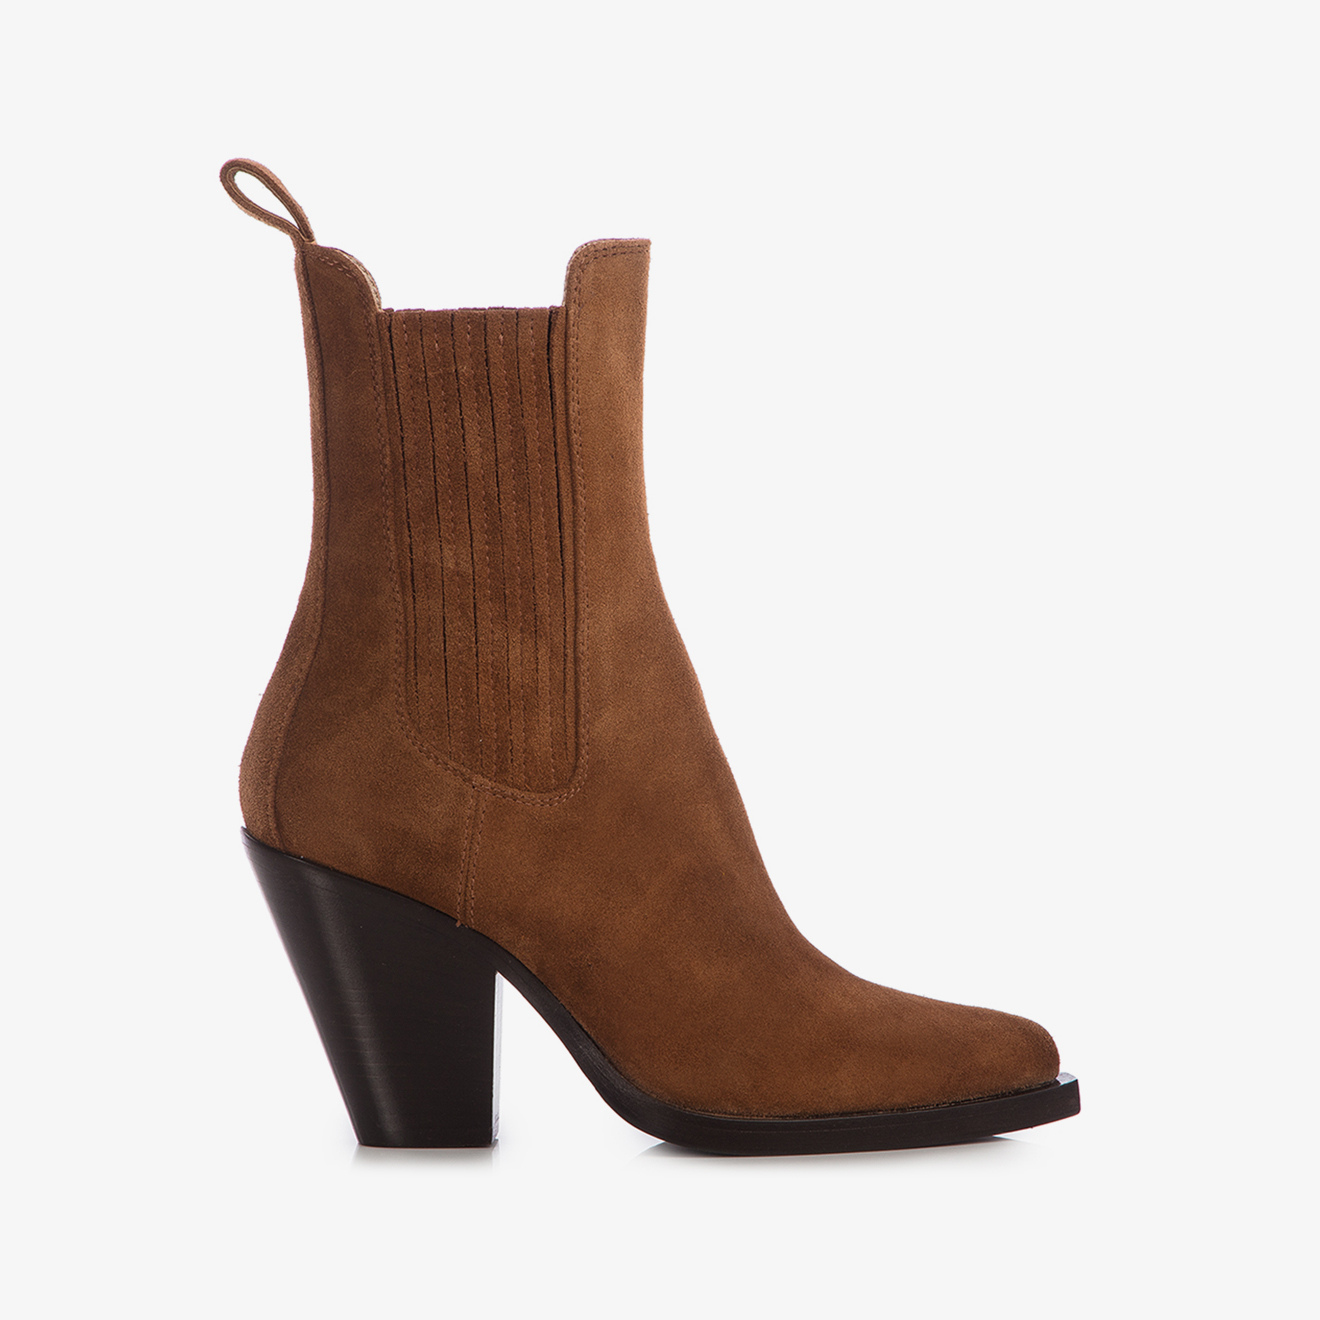 IVONNE ANKLE BOOT 90 mm - Le Silla official outlet